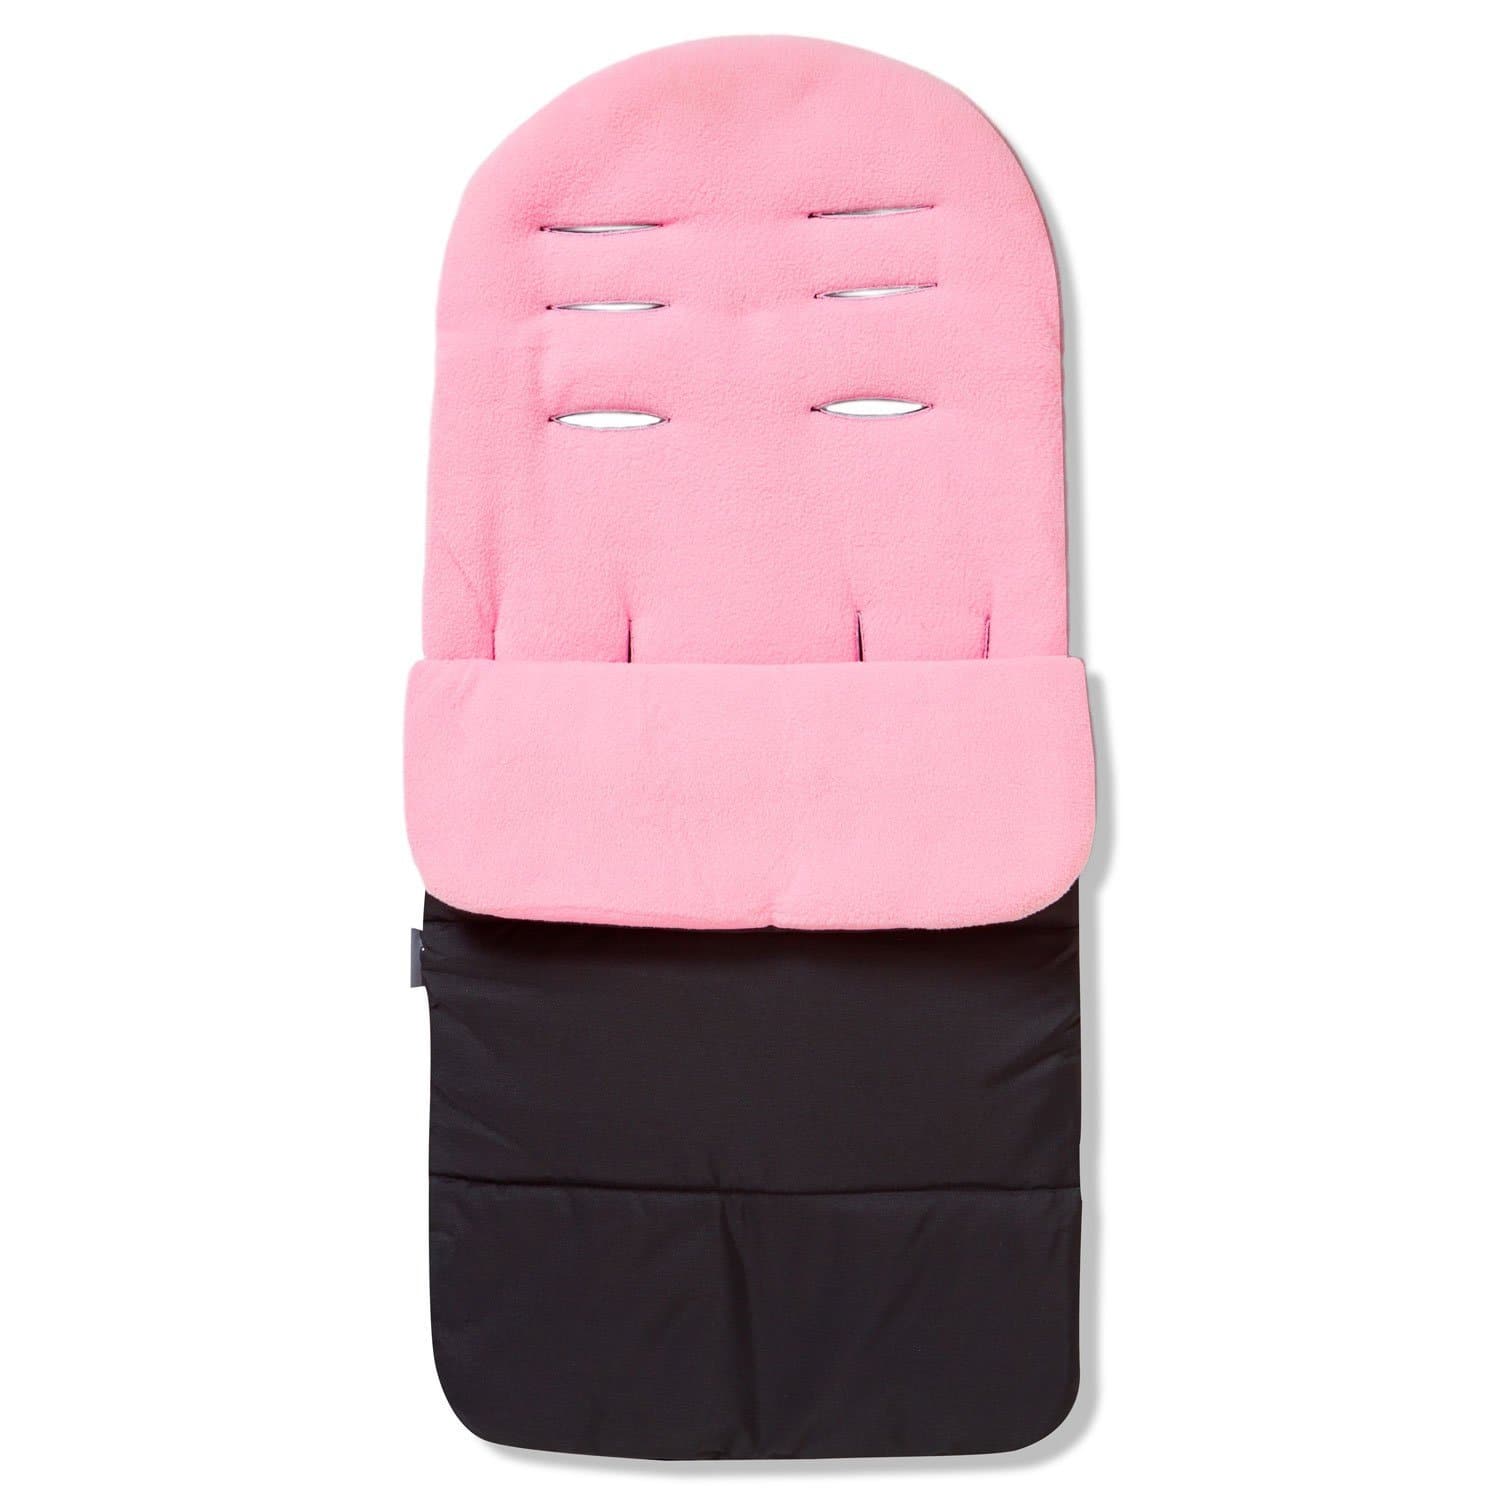 Premium Footmuff / Cosy Toes Compatible with Casual - Candy Pink / Fits All Models | For Your Little One